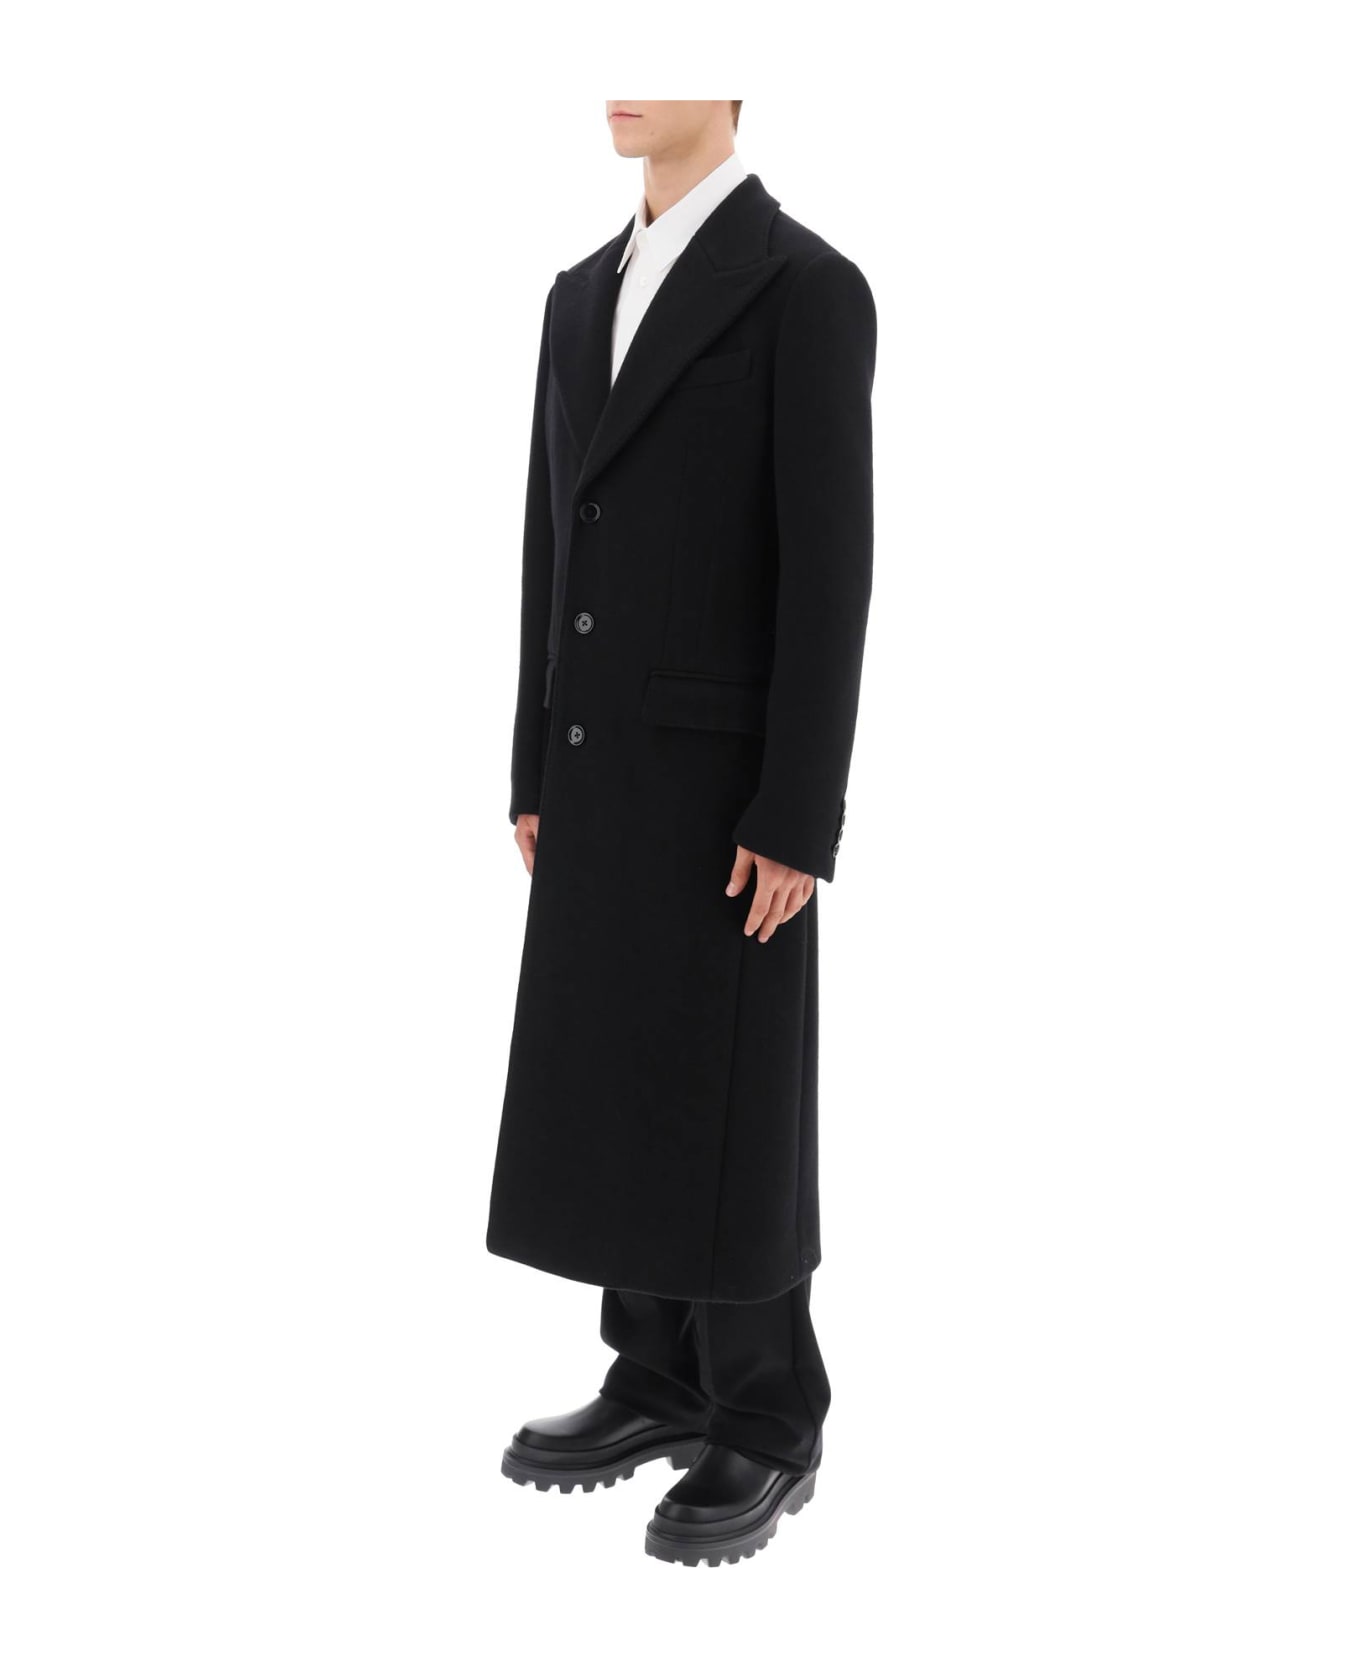 Dolce & Gabbana Long Single-breasted Deconstructed Coat - Black コート